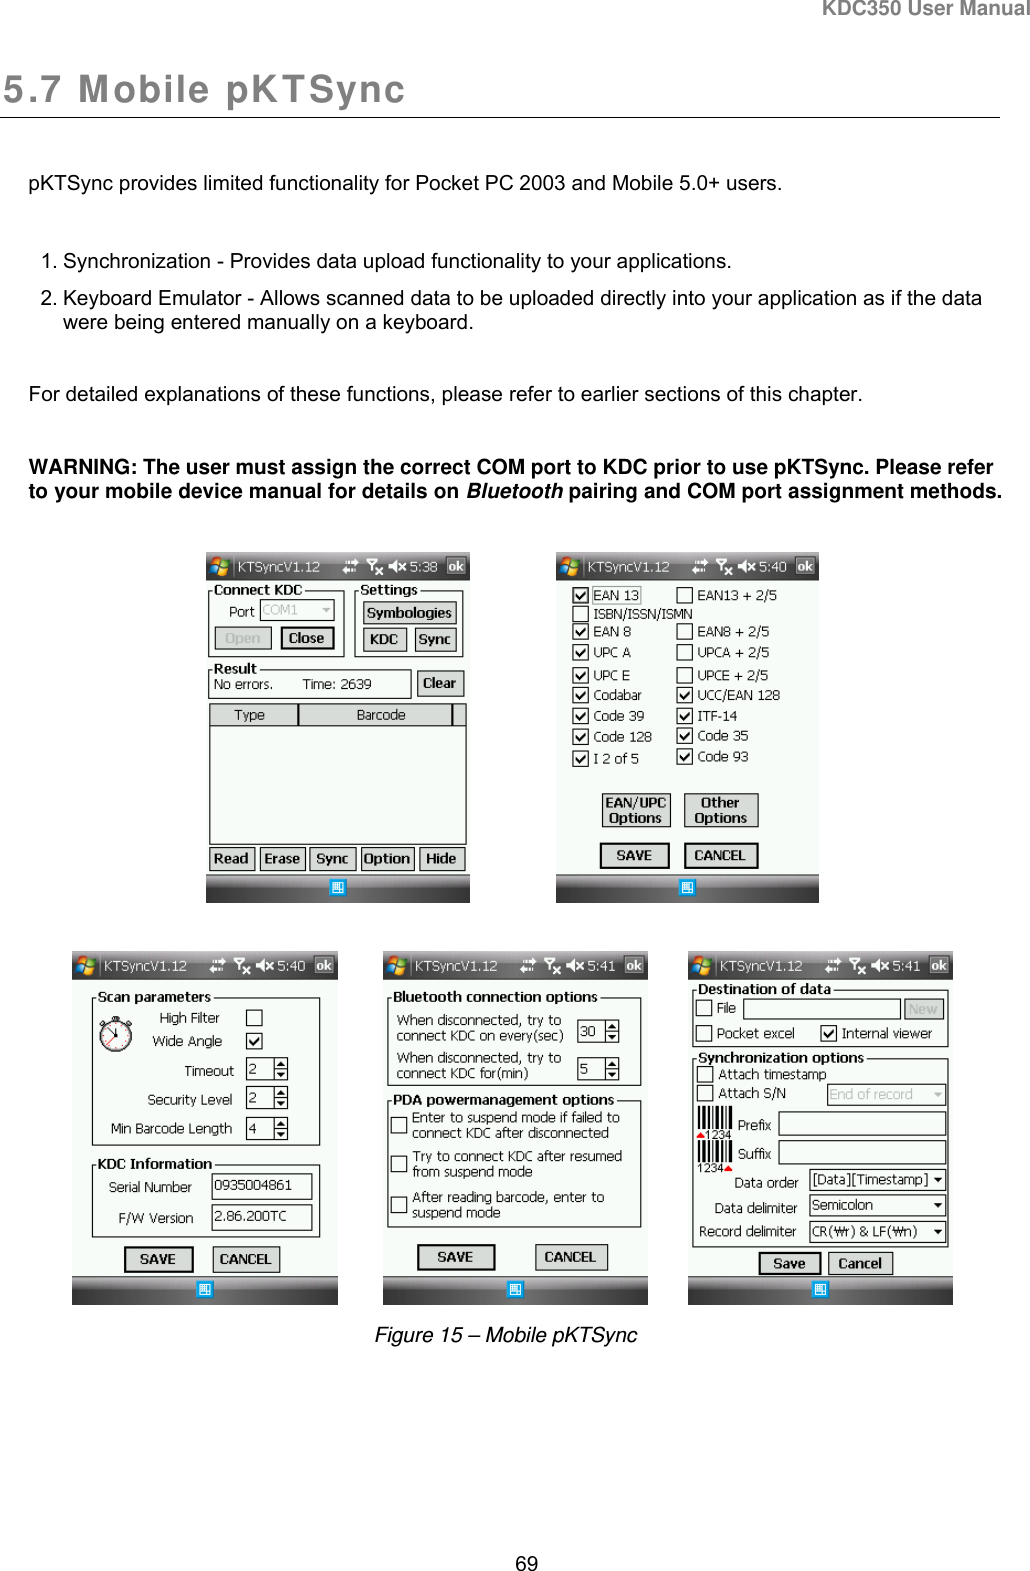 KDC350 User Manual  69  5.7 Mobile pKTSync  pKTSync provides limited functionality for Pocket PC 2003 and Mobile 5.0+ users.  1. Synchronization - Provides data upload functionality to your applications. 2. Keyboard Emulator - Allows scanned data to be uploaded directly into your application as if the data were being entered manually on a keyboard.  For detailed explanations of these functions, please refer to earlier sections of this chapter.   WARNING: The user must assign the correct COM port to KDC prior to use pKTSync. Please refer to your mobile device manual for details on Bluetooth pairing and COM port assignment methods.                                       Figure 15 – Mobile pKTSync 